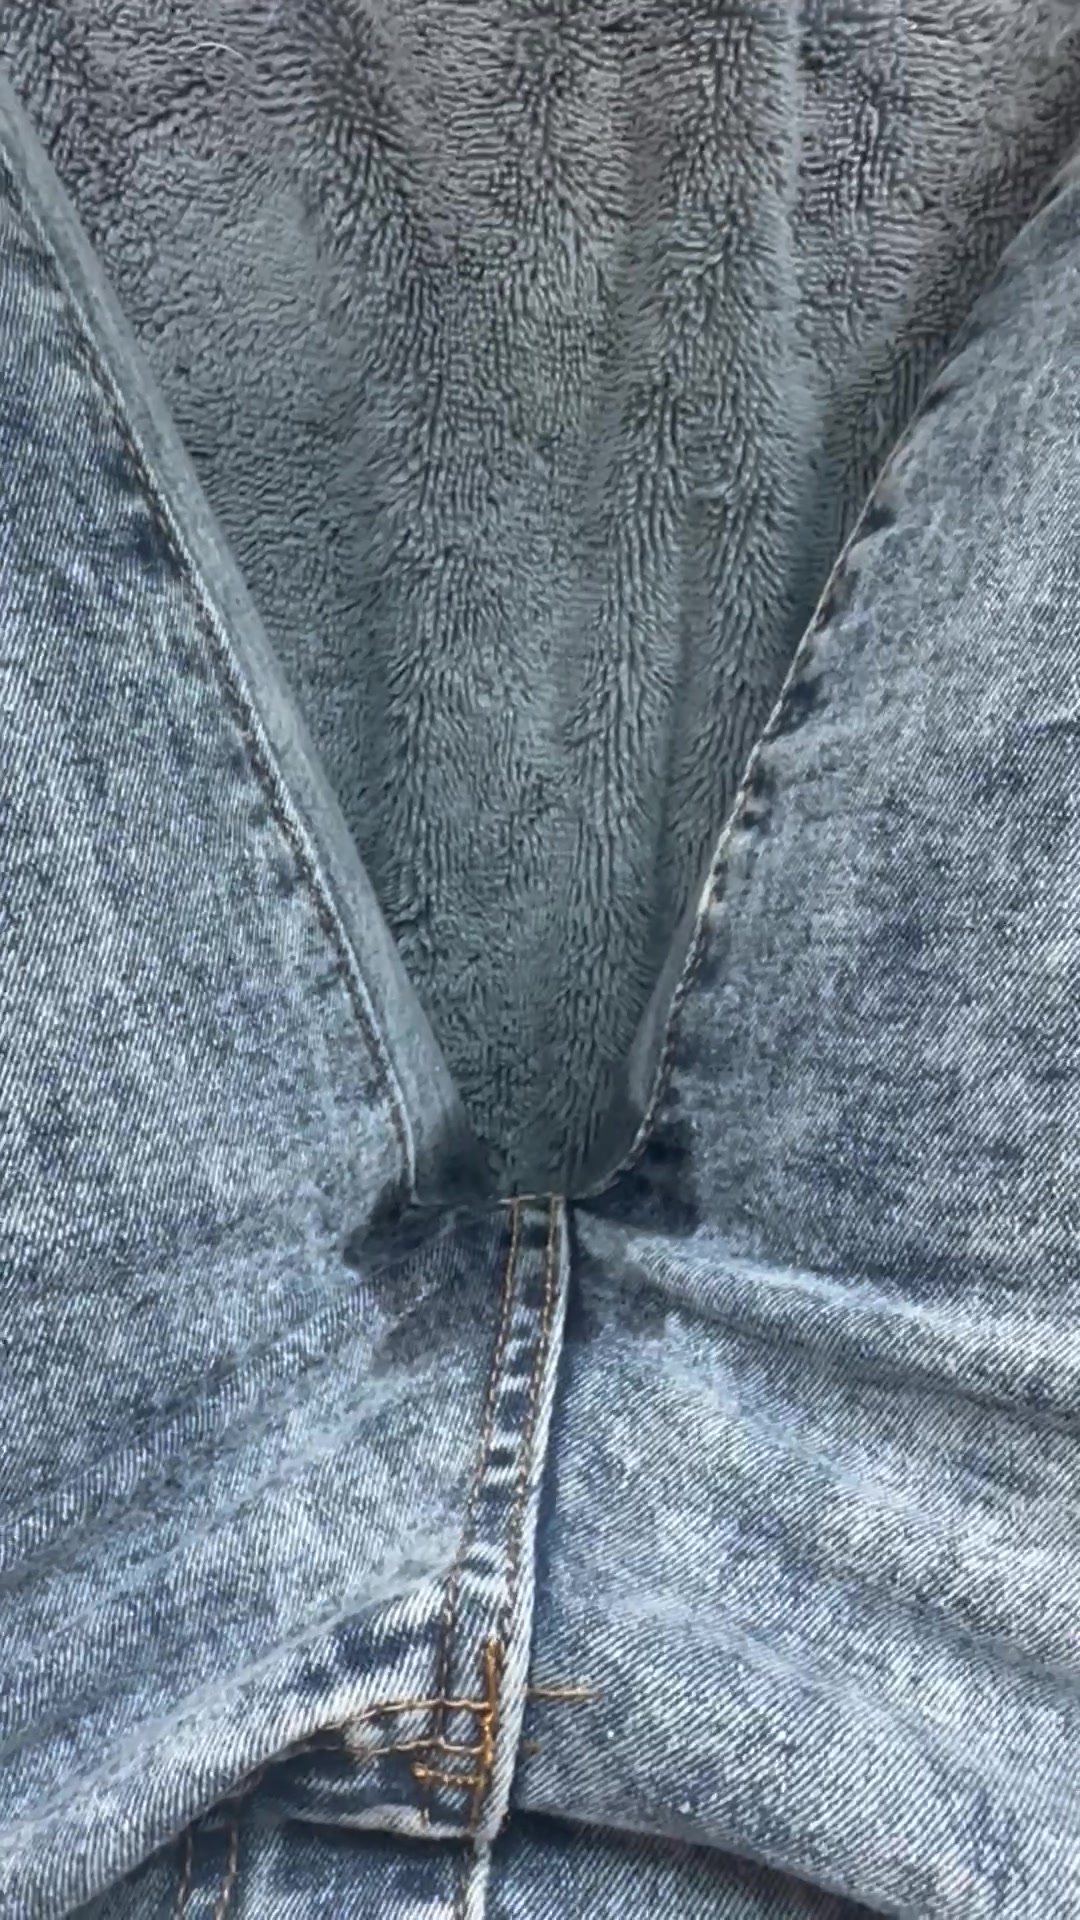 Making a little wet spot on my jeans at lunch